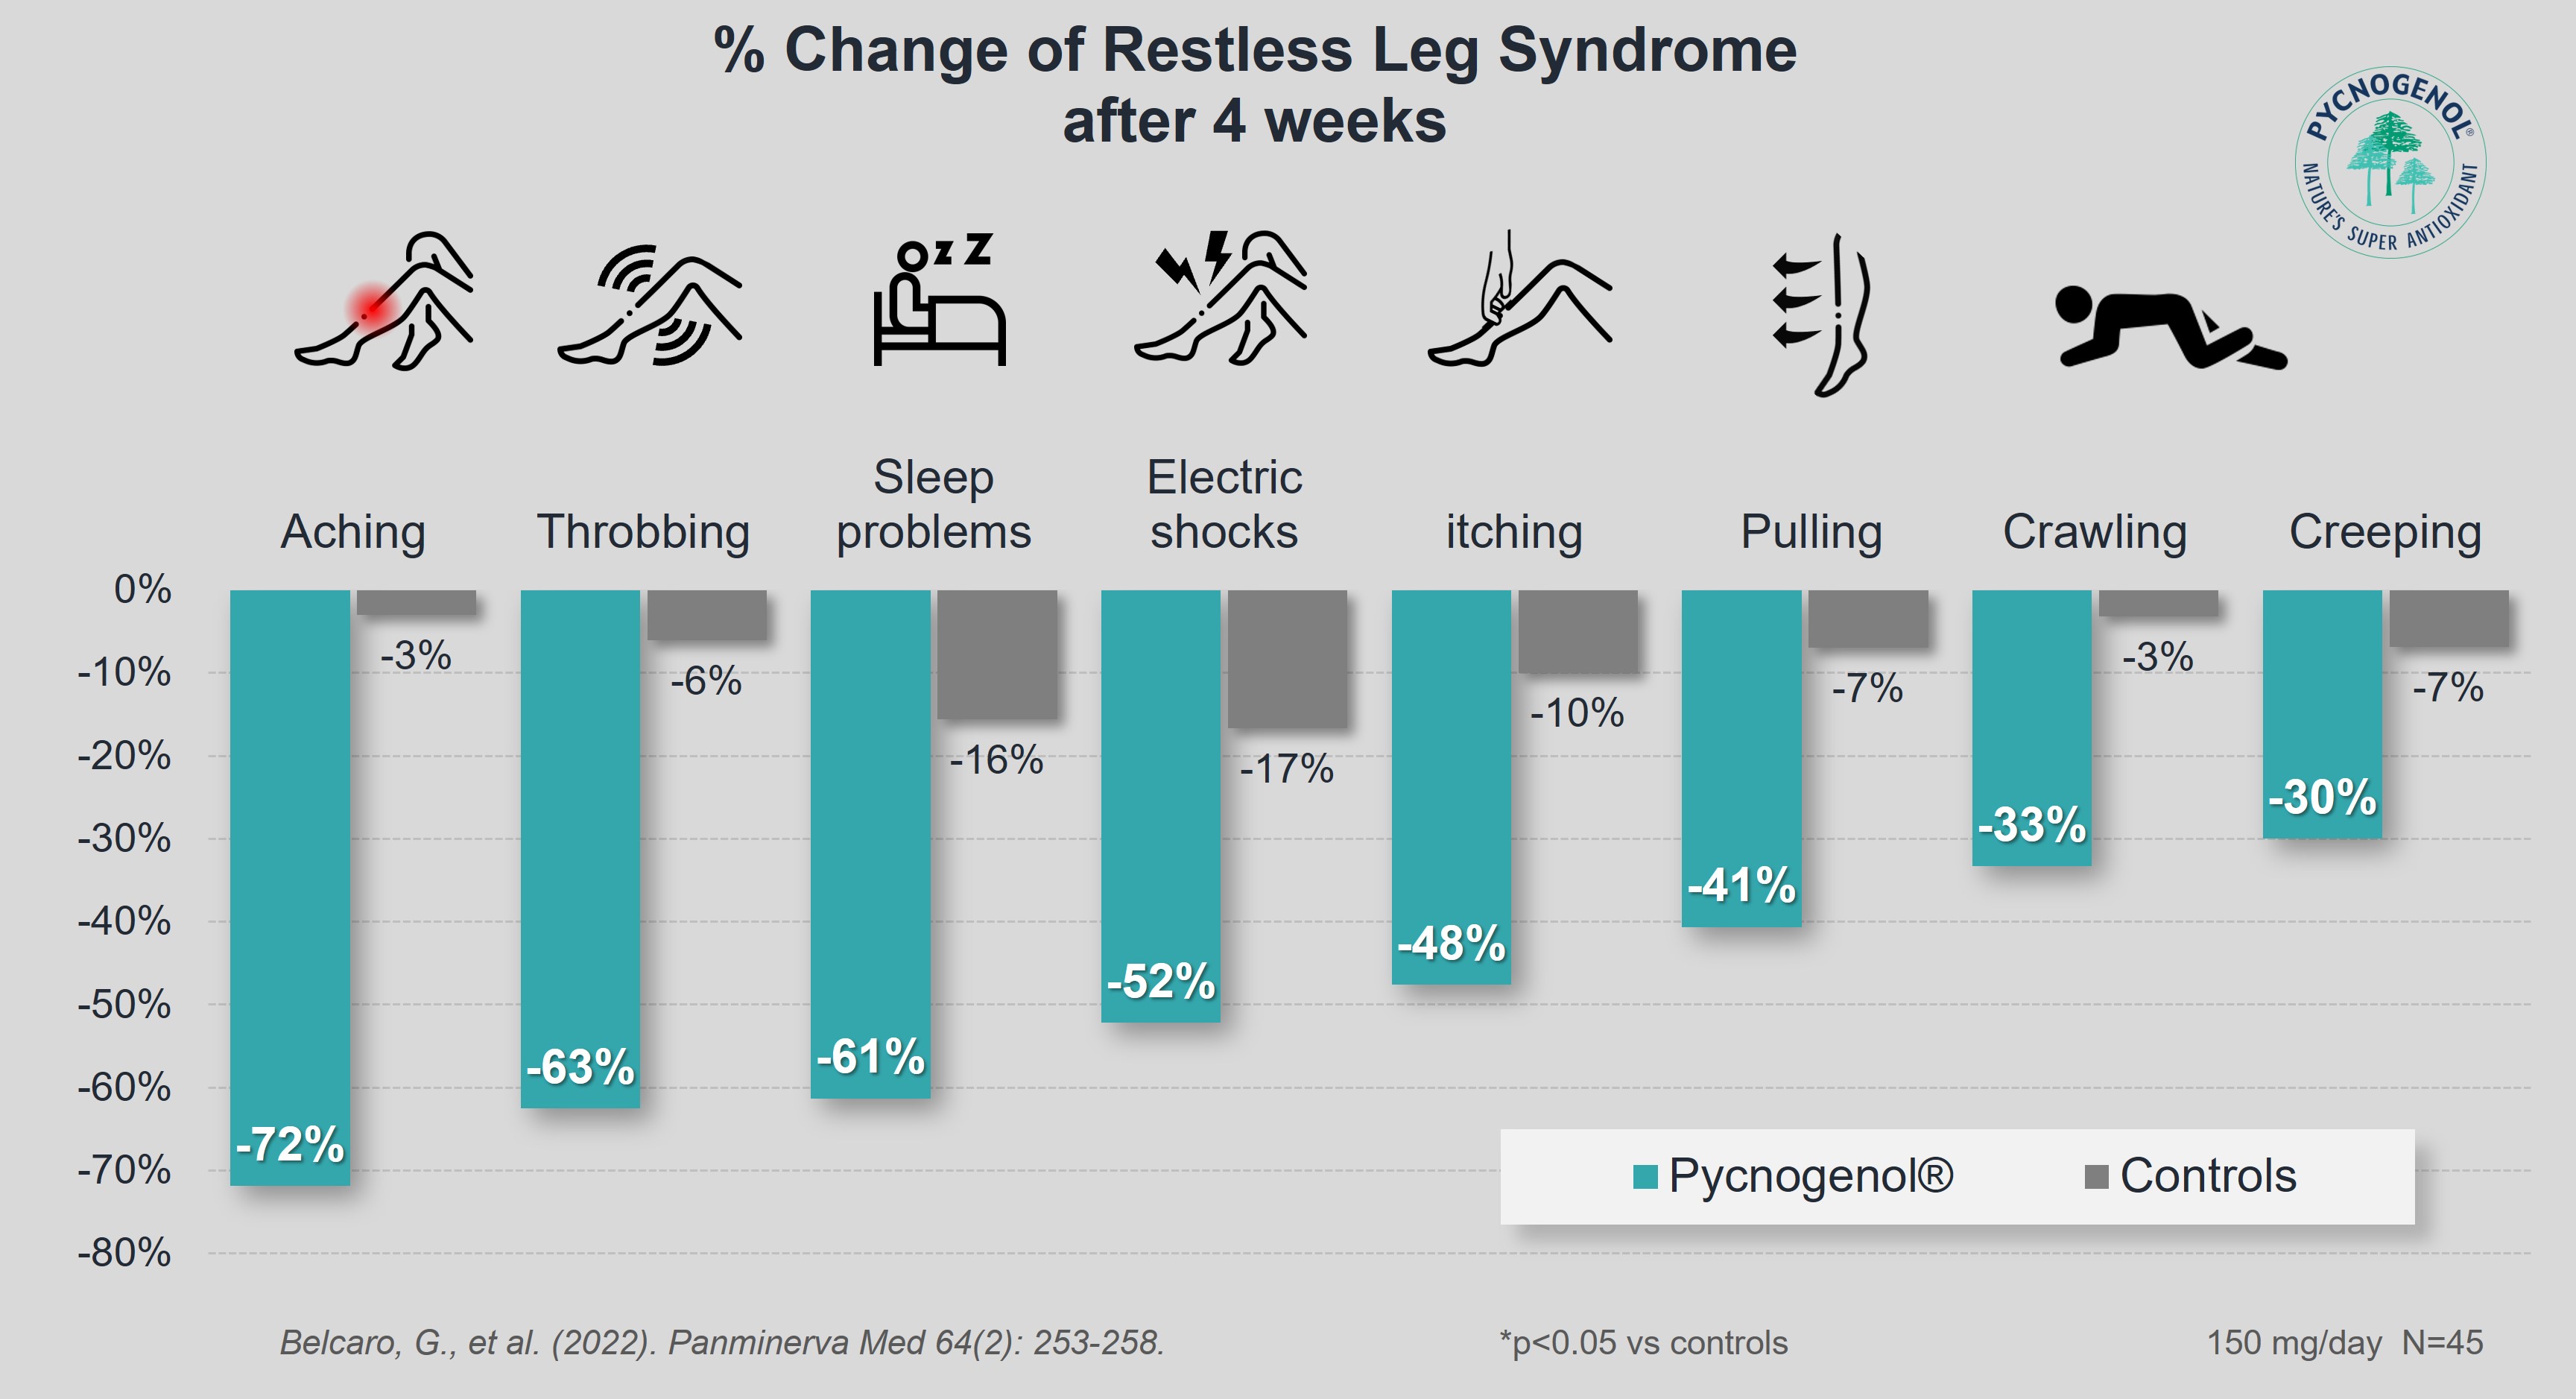 Study: Pycnogenol® Helps Relieve and May Prevent Symptoms of Restless Legs Syndrome